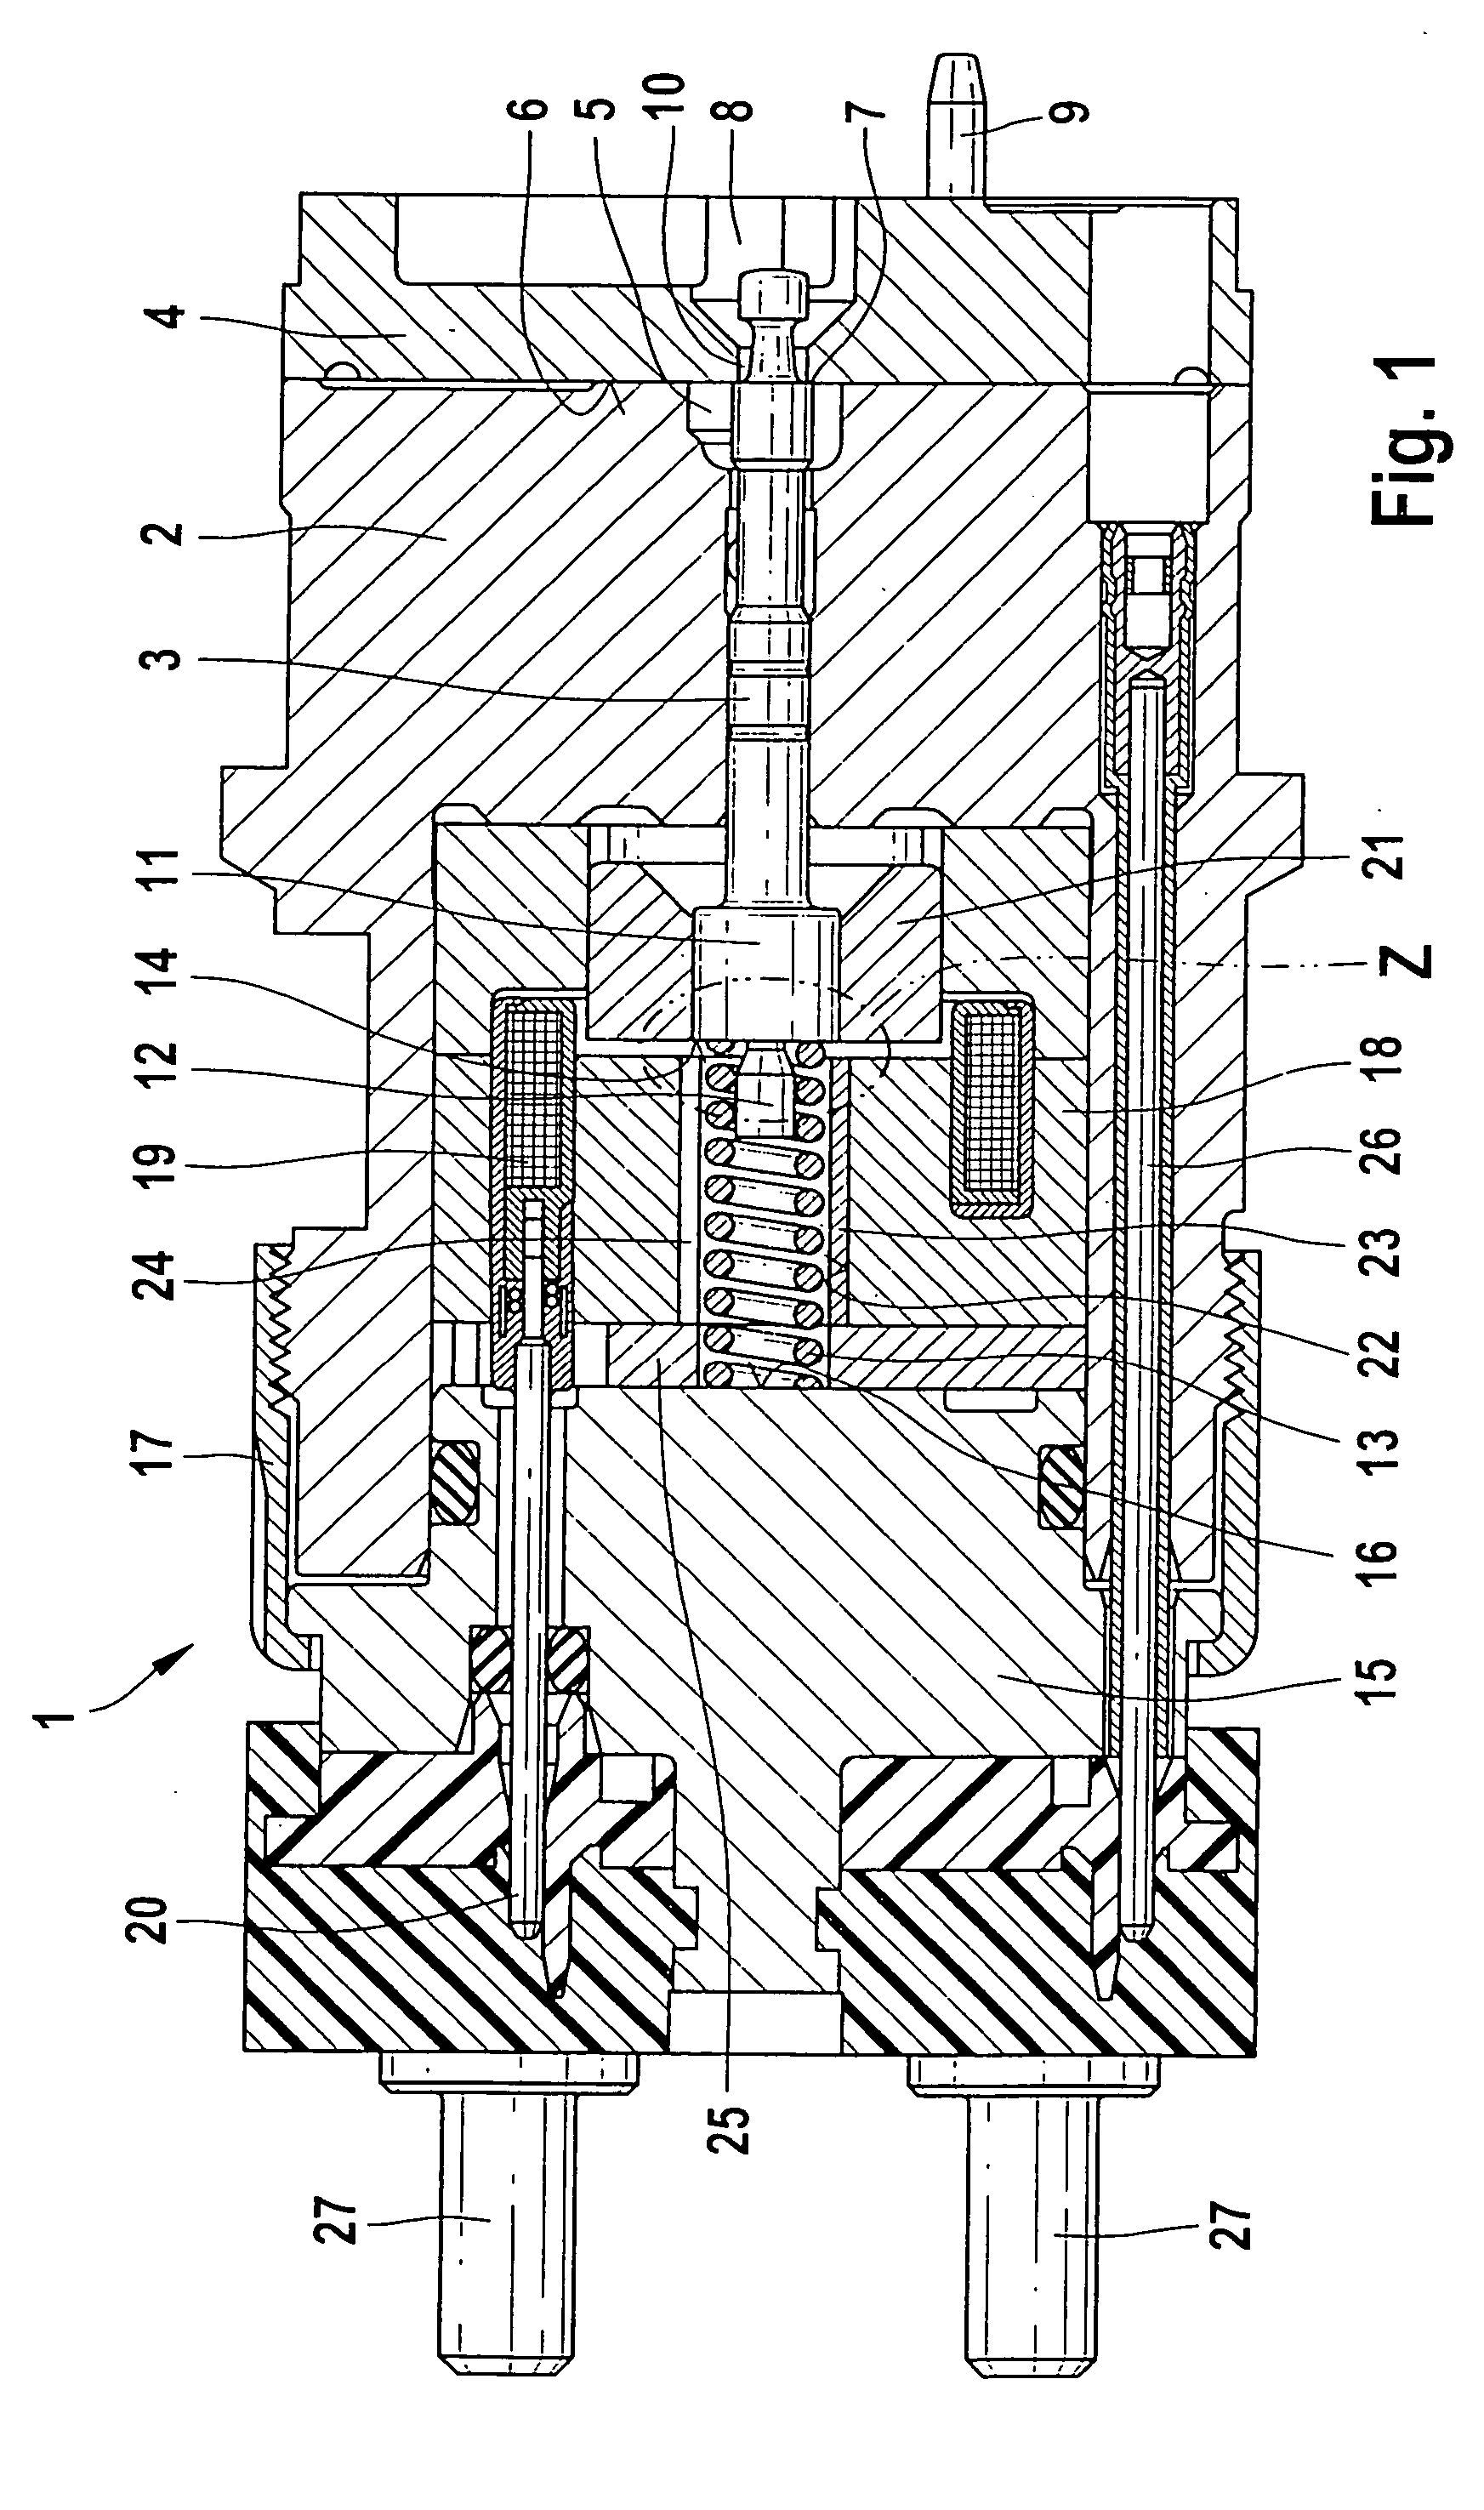 Fuel injector with clamping sleeve as a stop for a valve needle